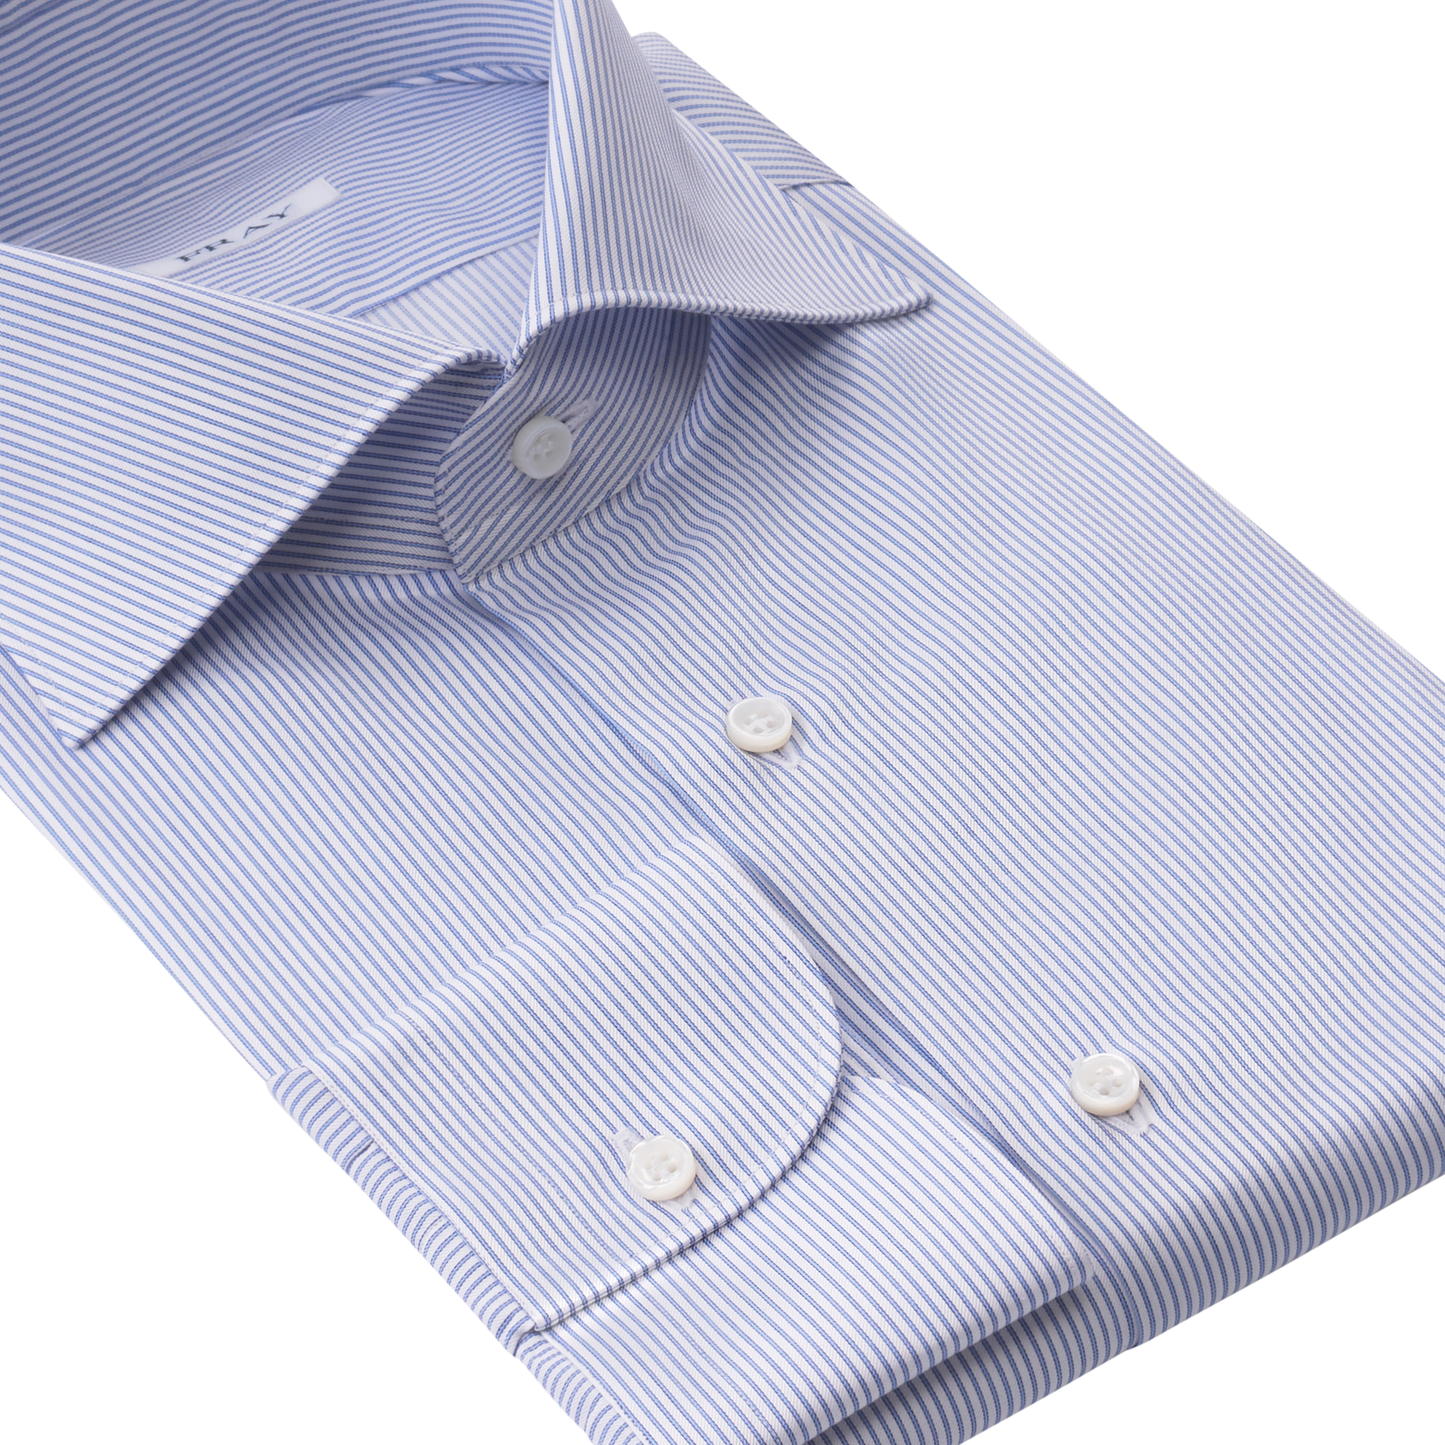 Fray Striped Cotton Shirt in White and Light Blue - SARTALE